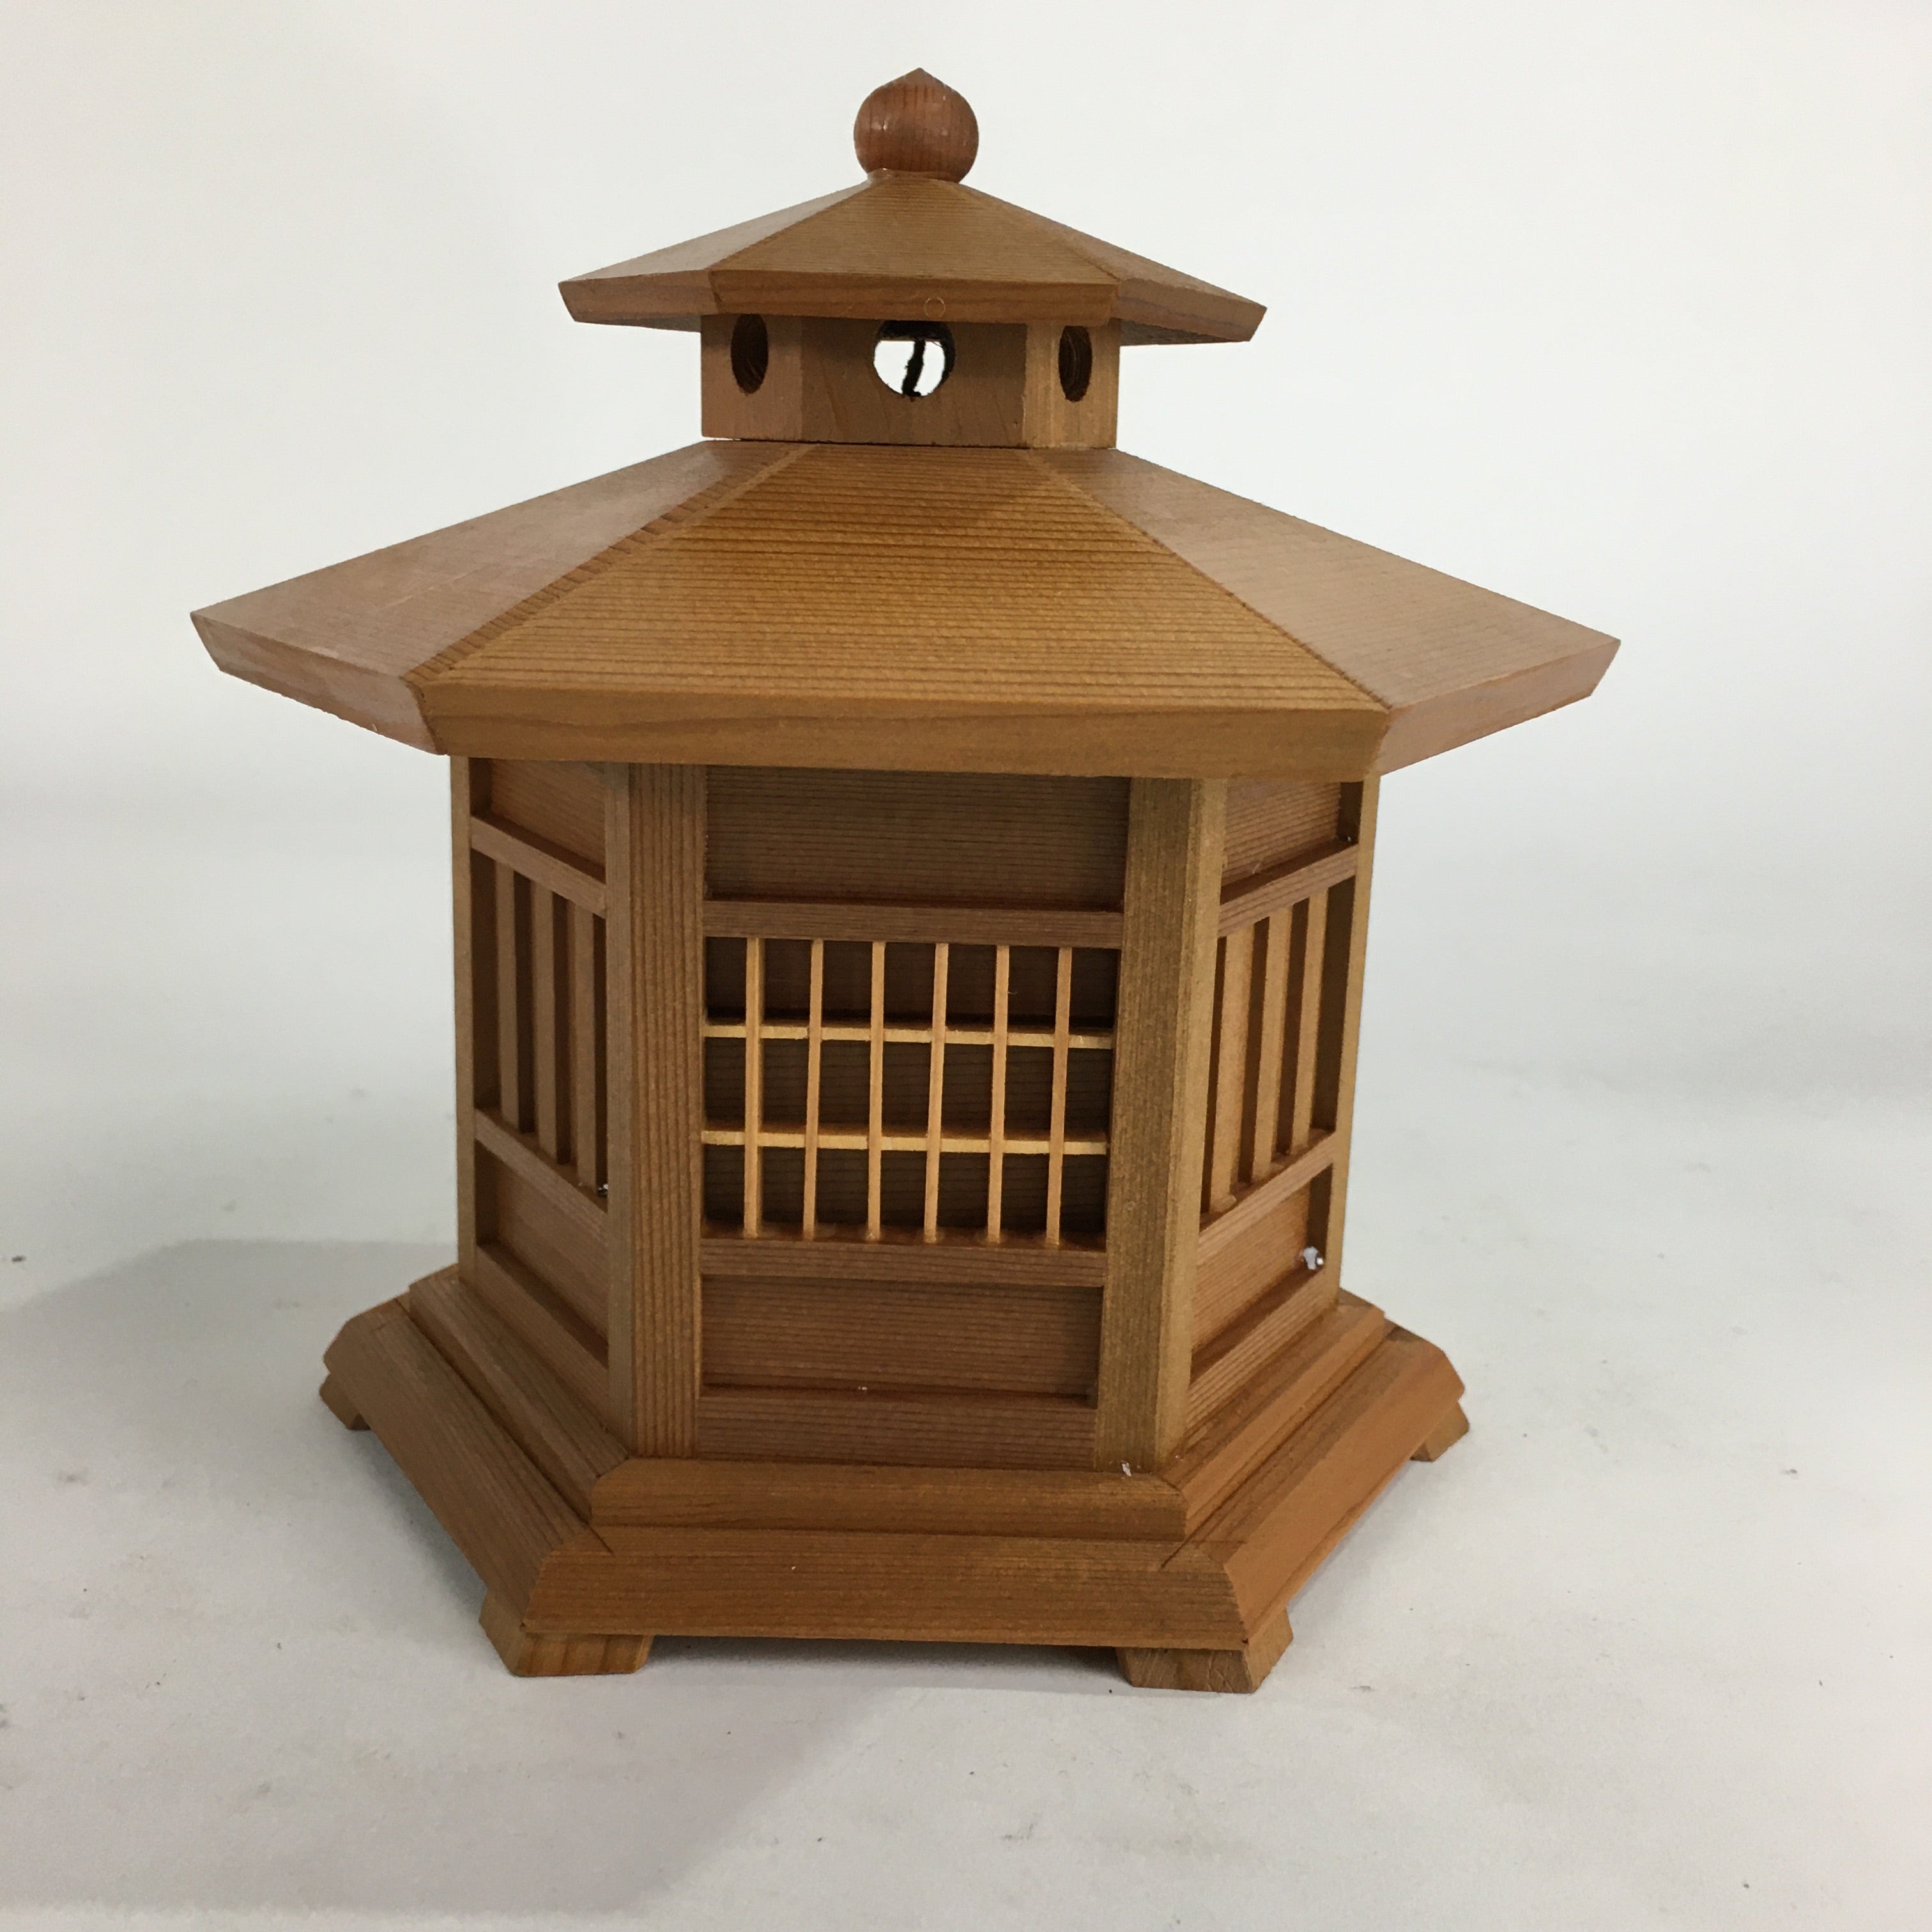 Japanese Wooden Accessory Box Vtg Boxed Hexagonal Lantern Two-tiered PX596